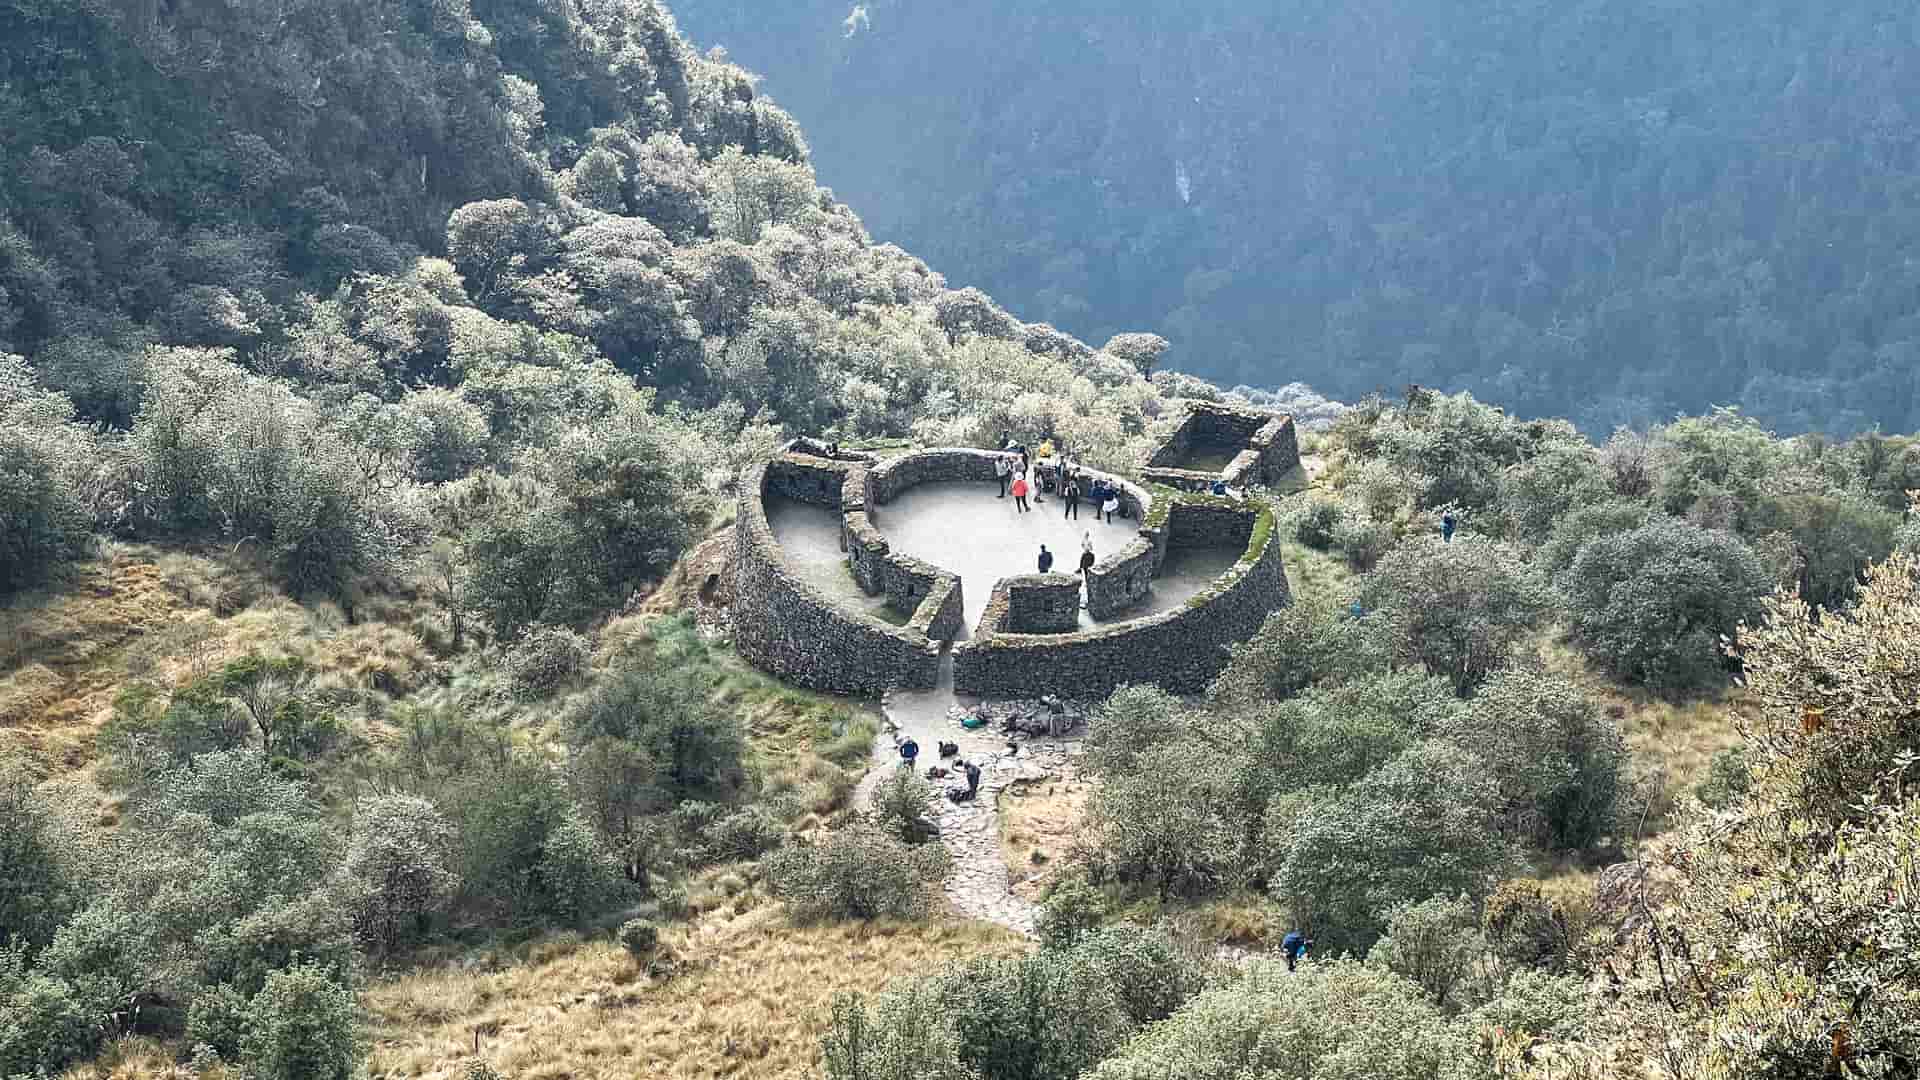 Runkuraqay Inca Site - Best time to hike the Inca Trail